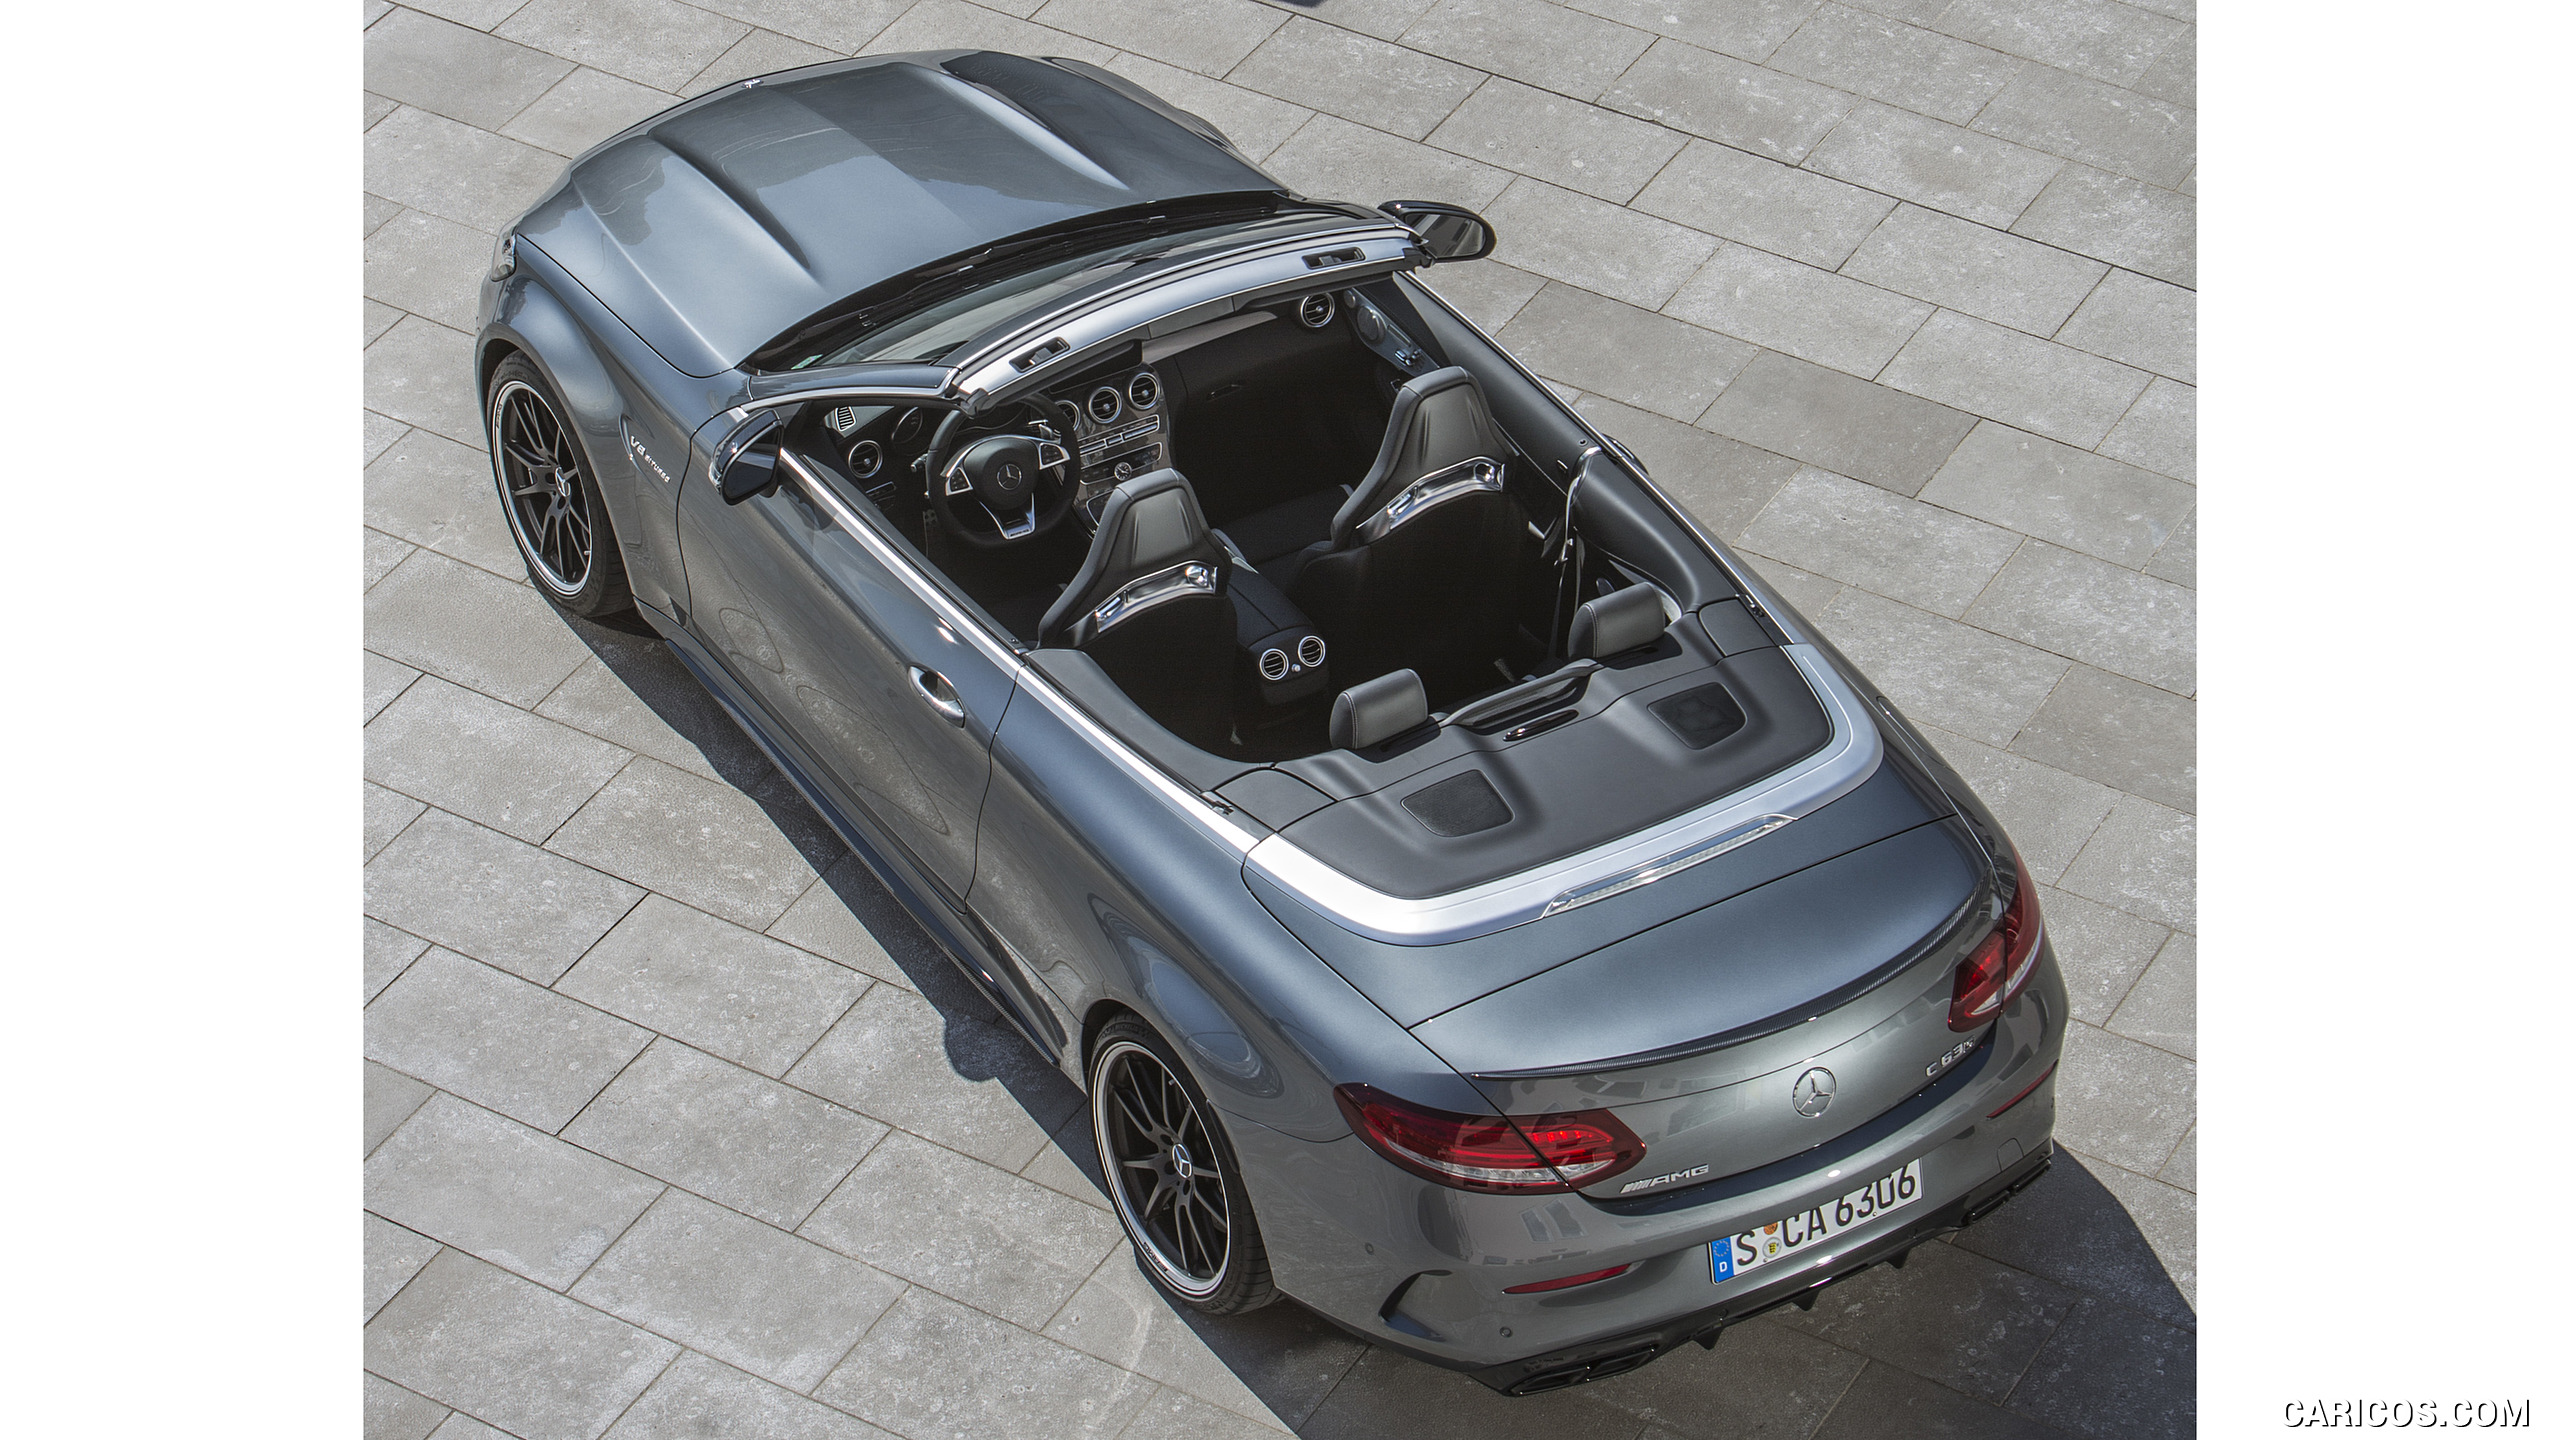 2017 Mercedes-AMG C63 S Cabriolet - Top, #61 of 222